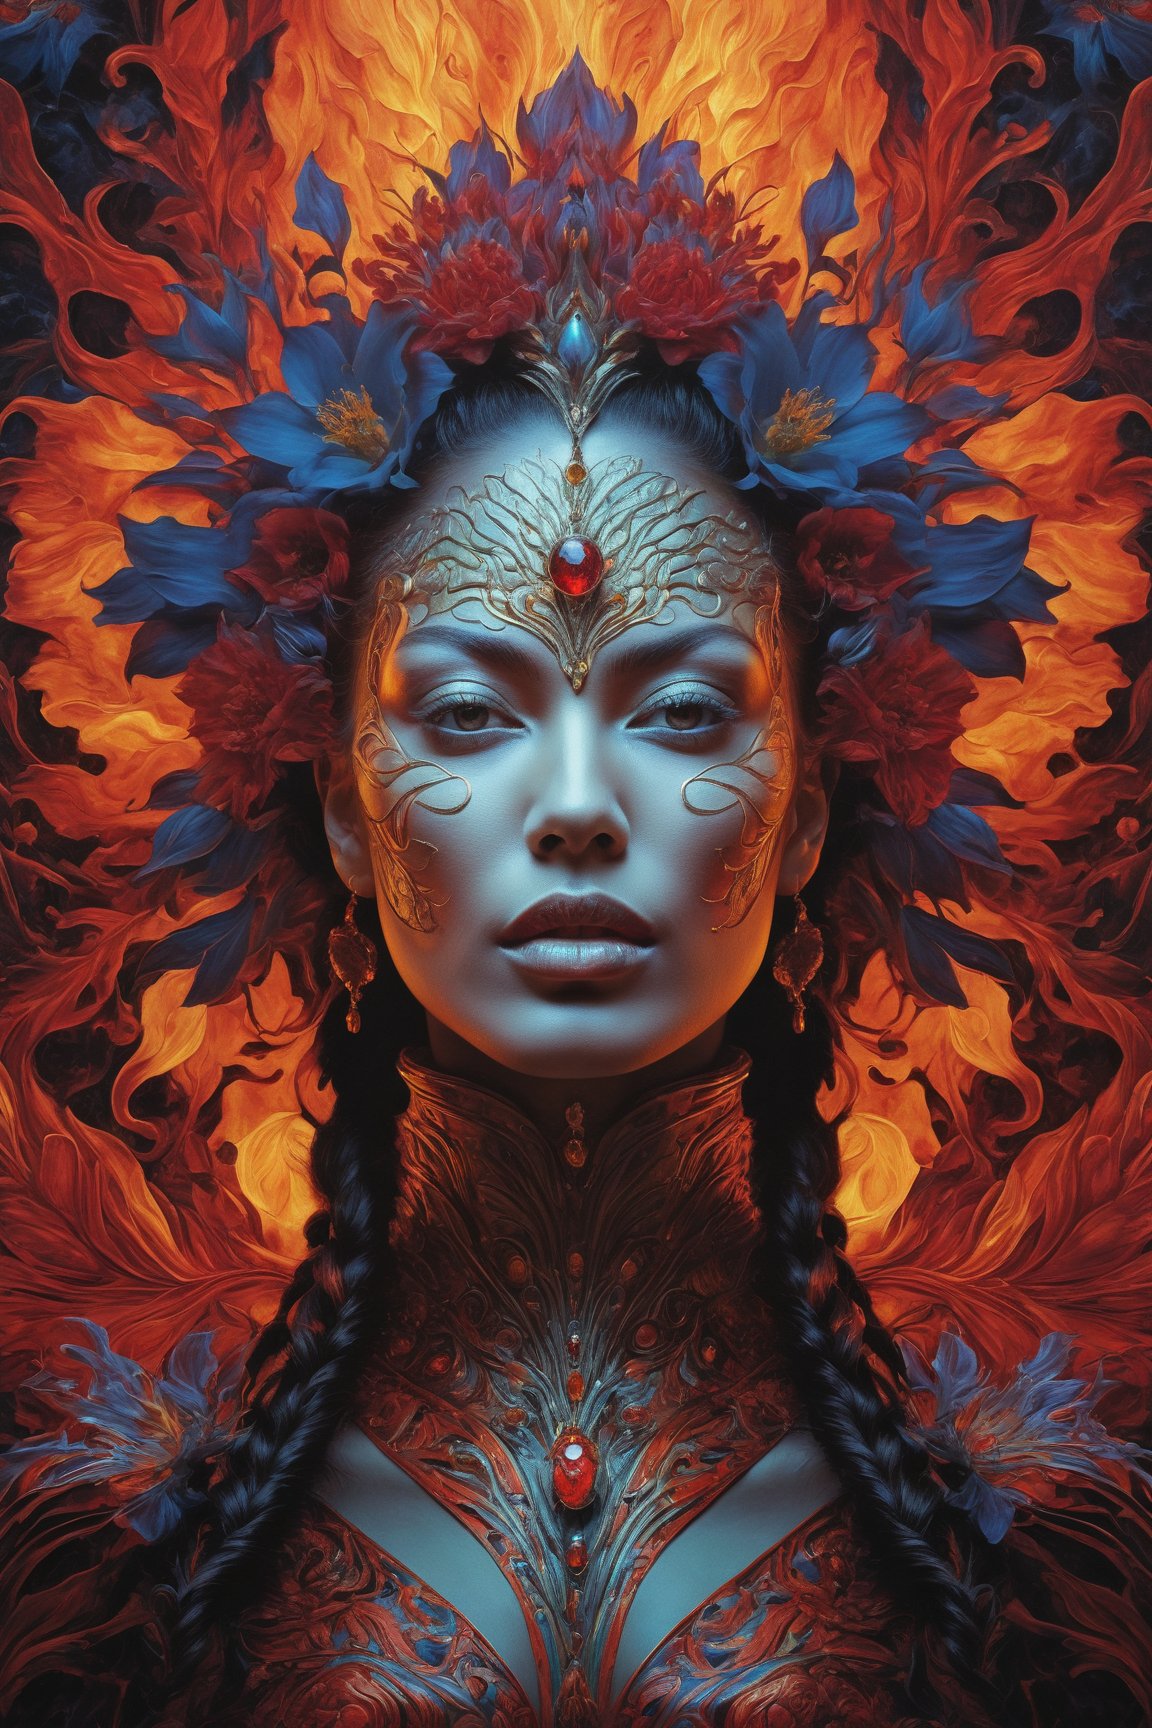 An ultra hd detailed painting of many different types of flowers by android jones, earnst haeckel, james jean. behance contest winner, generative art, baroque, intricate patterns, fractalism, movie still, photorealistic,Portrait of a beautiful woman surrounded by fire, portrait of beautiful young maiden, warhammer, some red water, the middle ages, highly detailed, artstation, illustration, sylvari portrait, 8 k quality, art by partick woodroof
